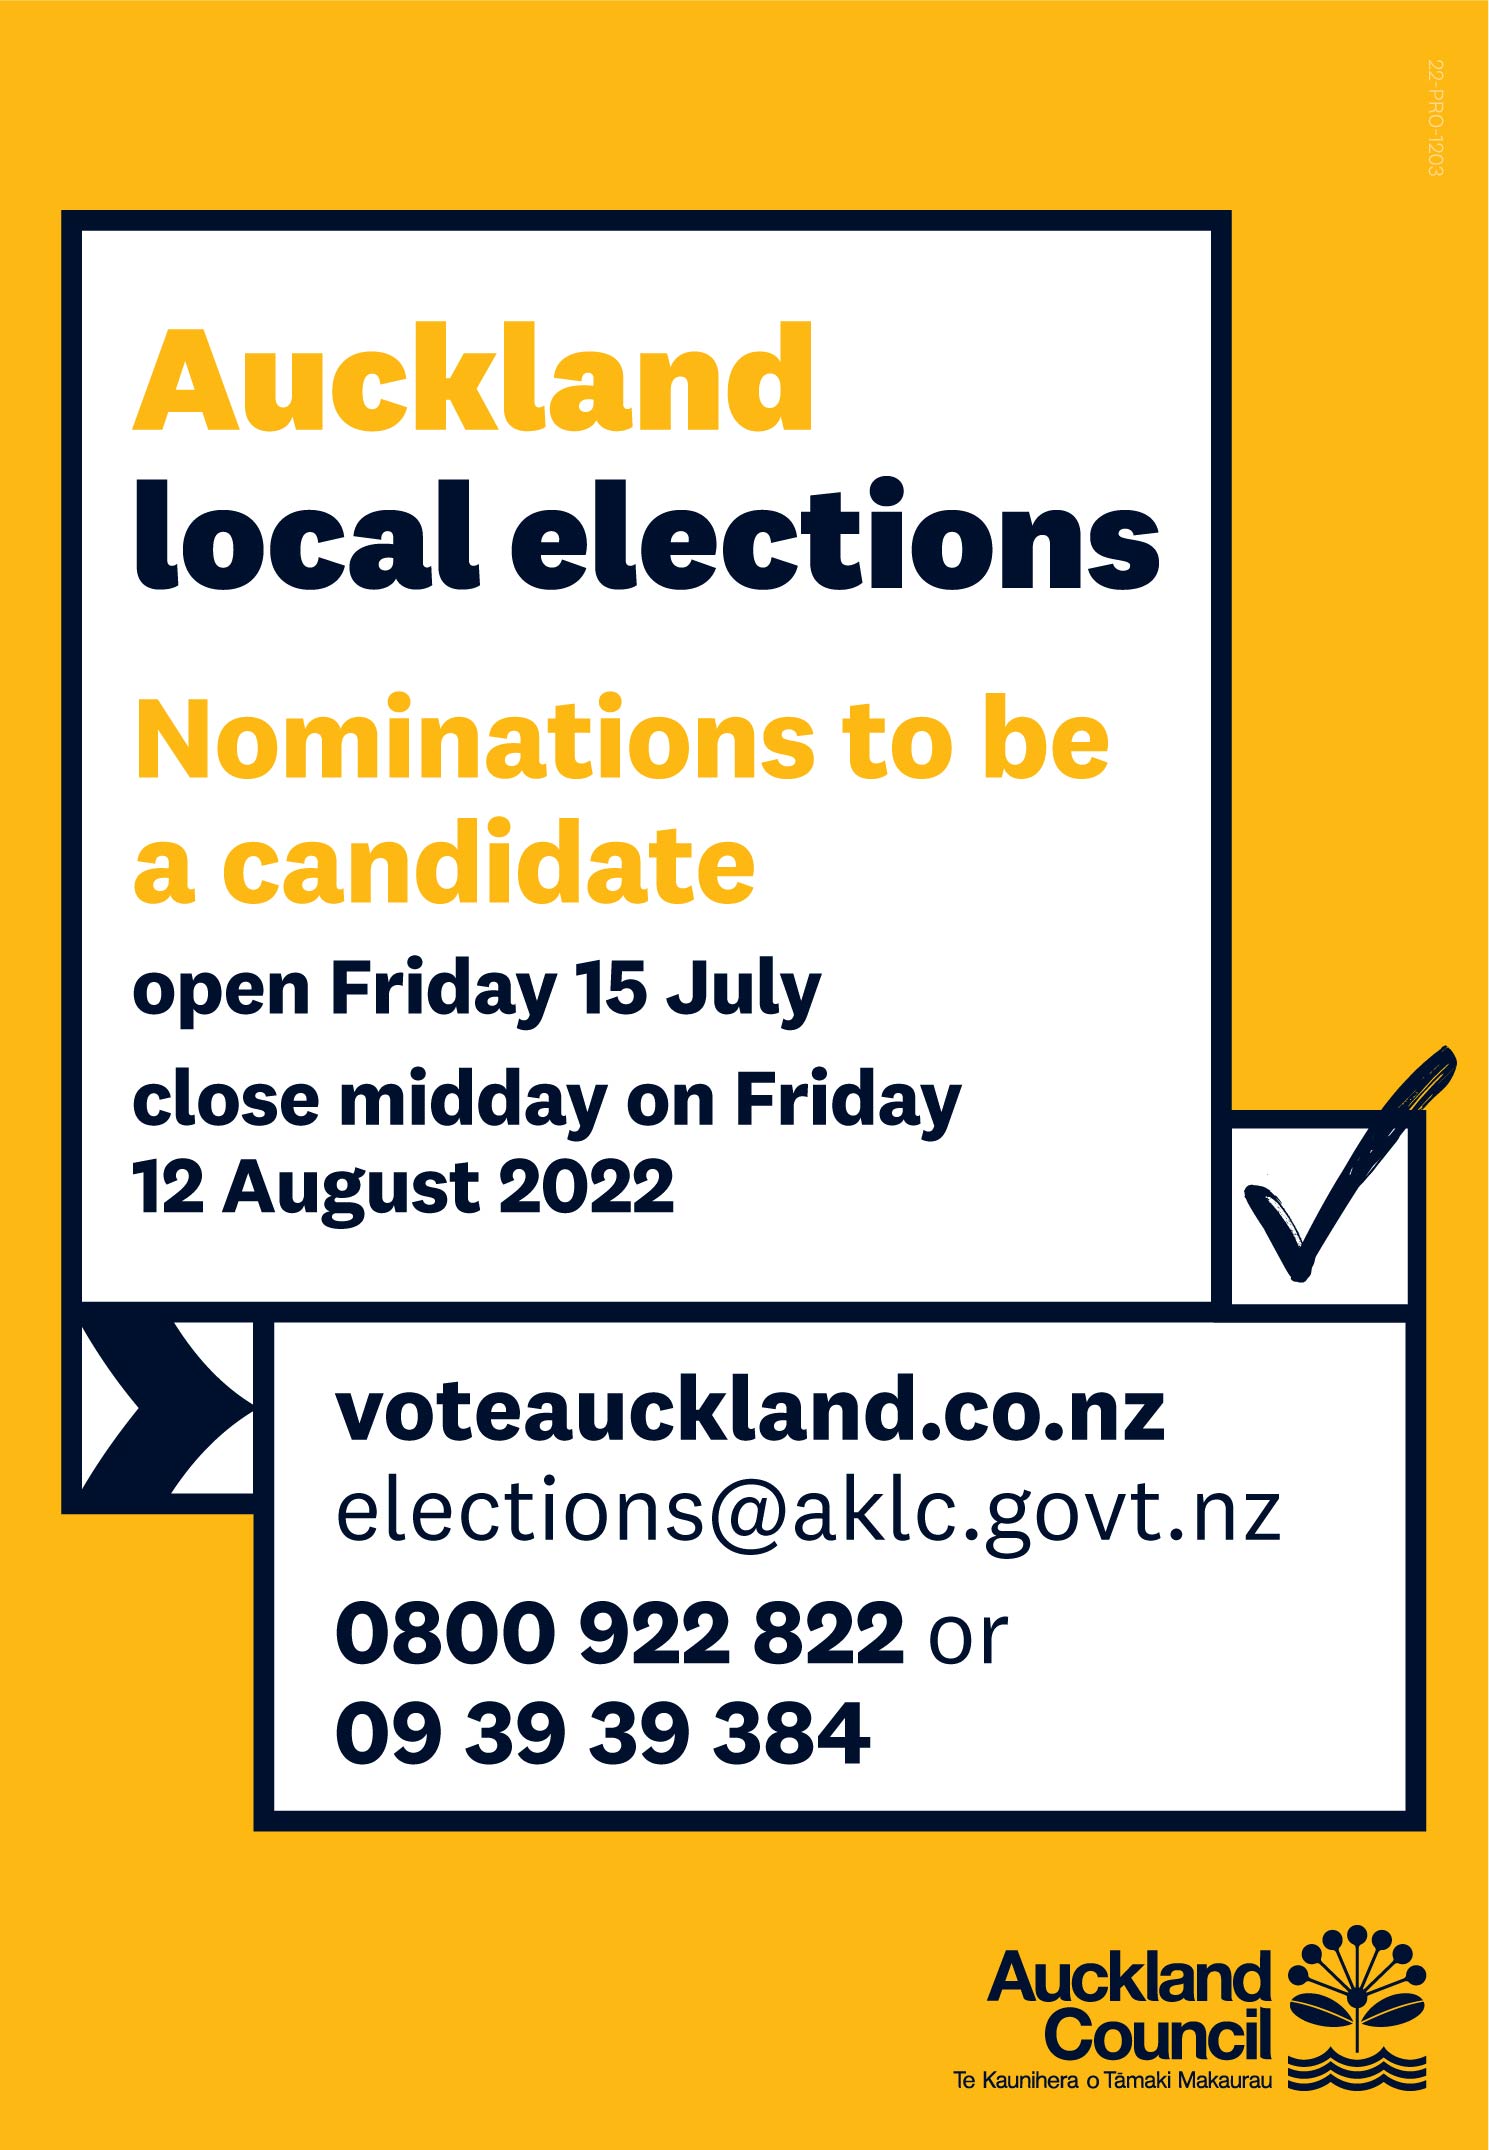 Nomination dates for local elections